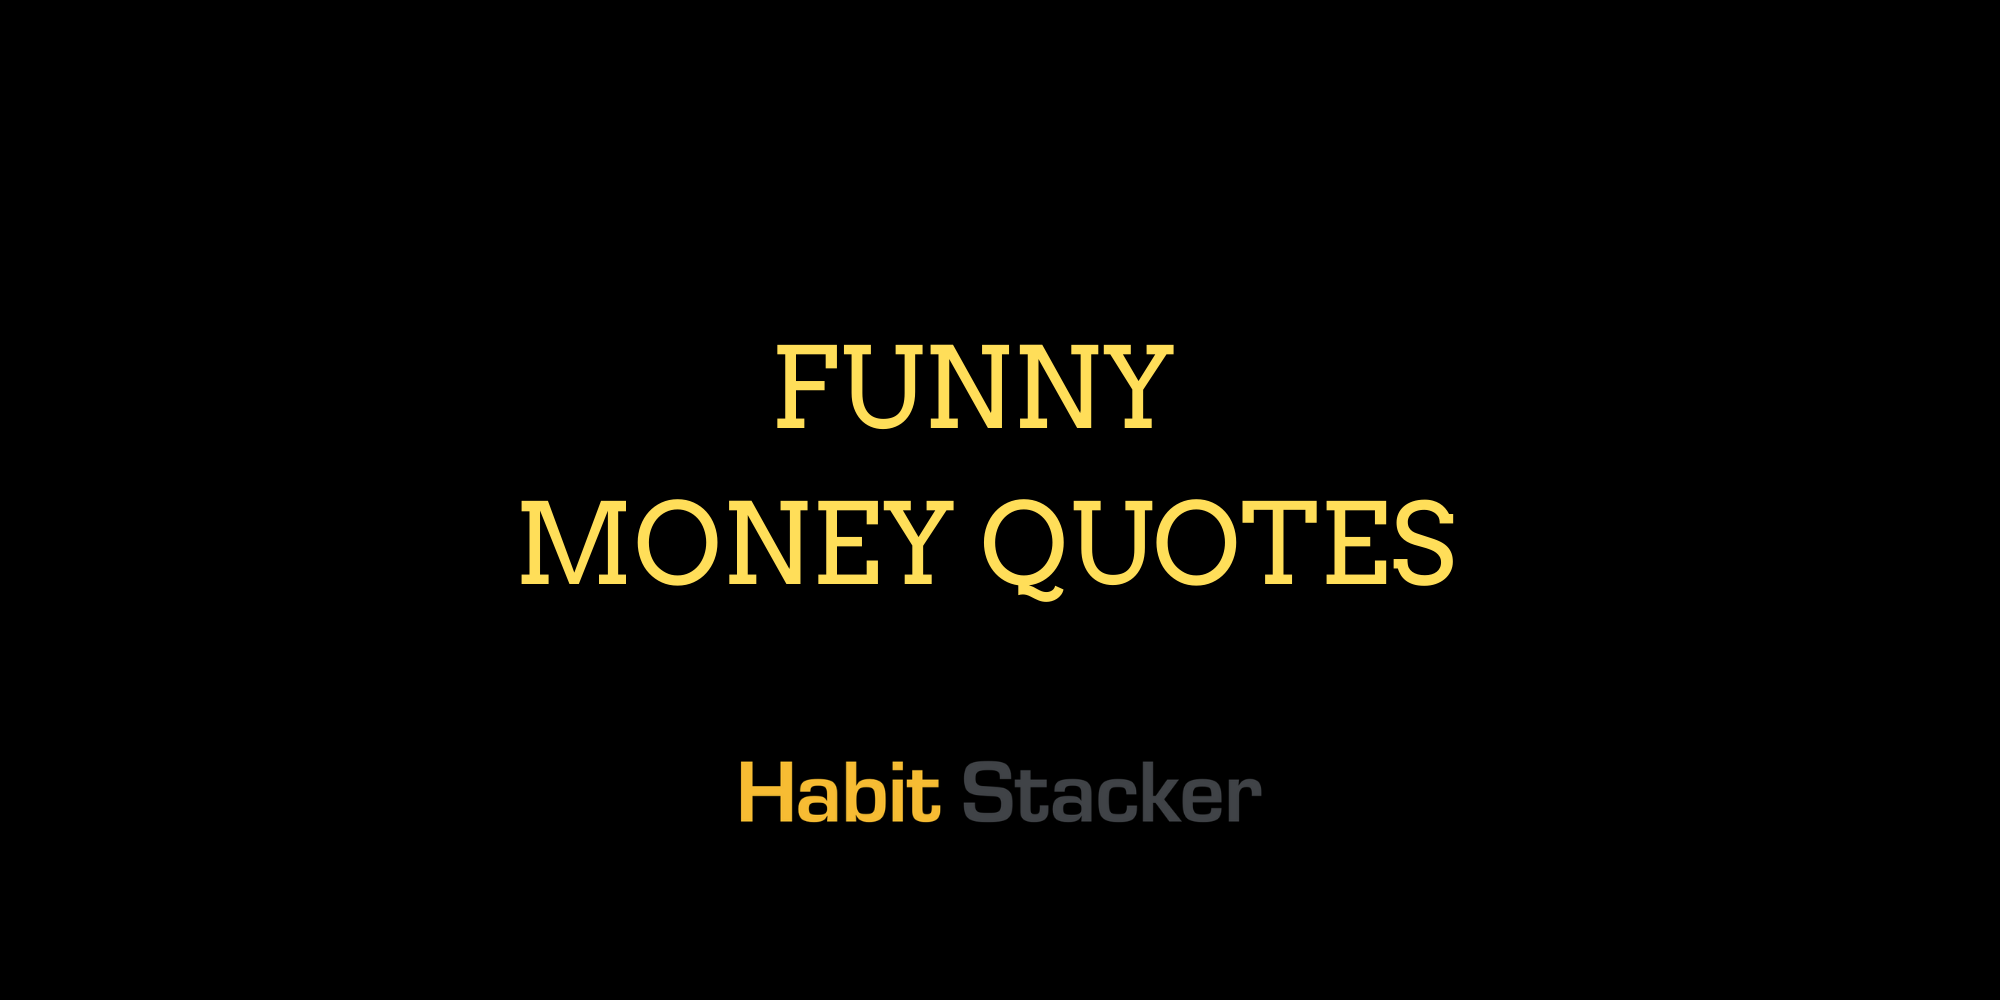 40 Funny Money Quotes To Make You Smile | Habit Stacker